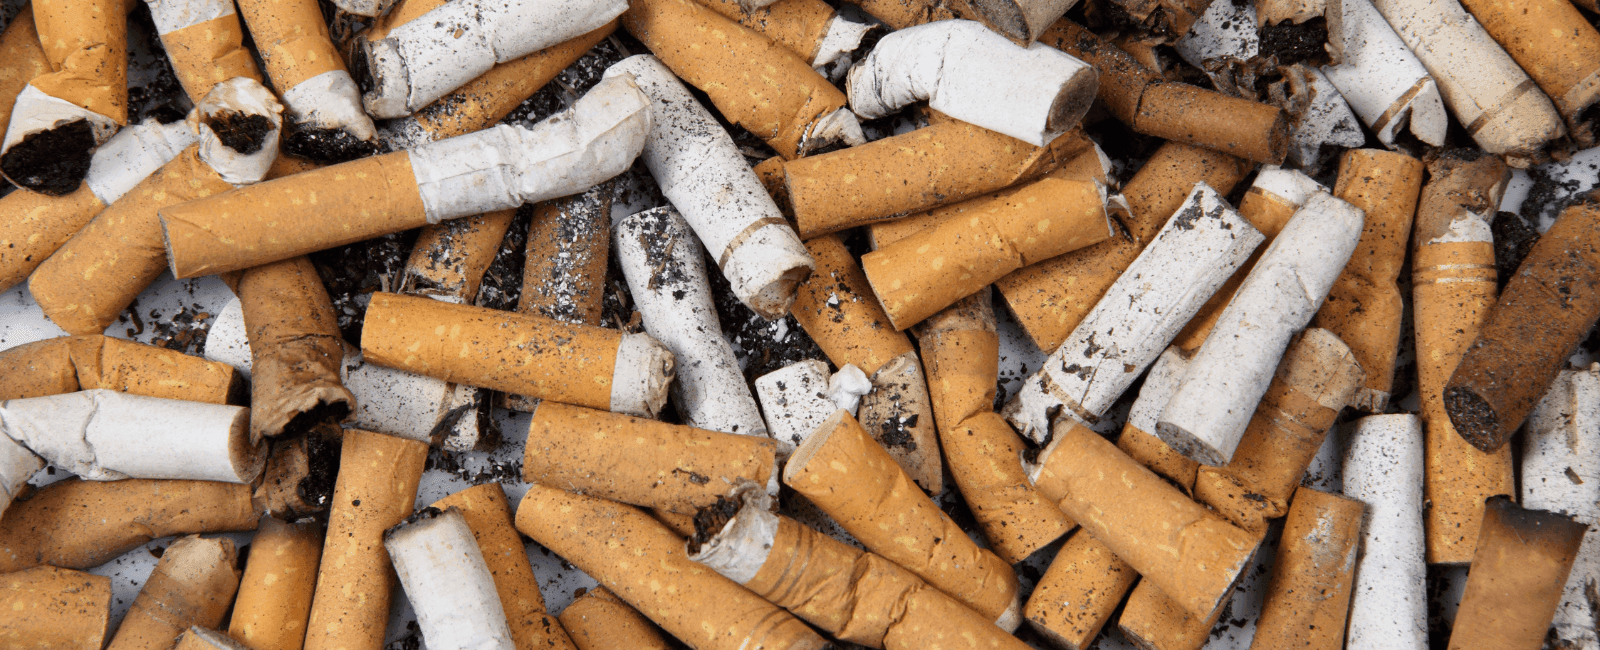 No Ifs, Ands, or Butts About It: Solving the Cigarette Waste Problem with Mushrooms